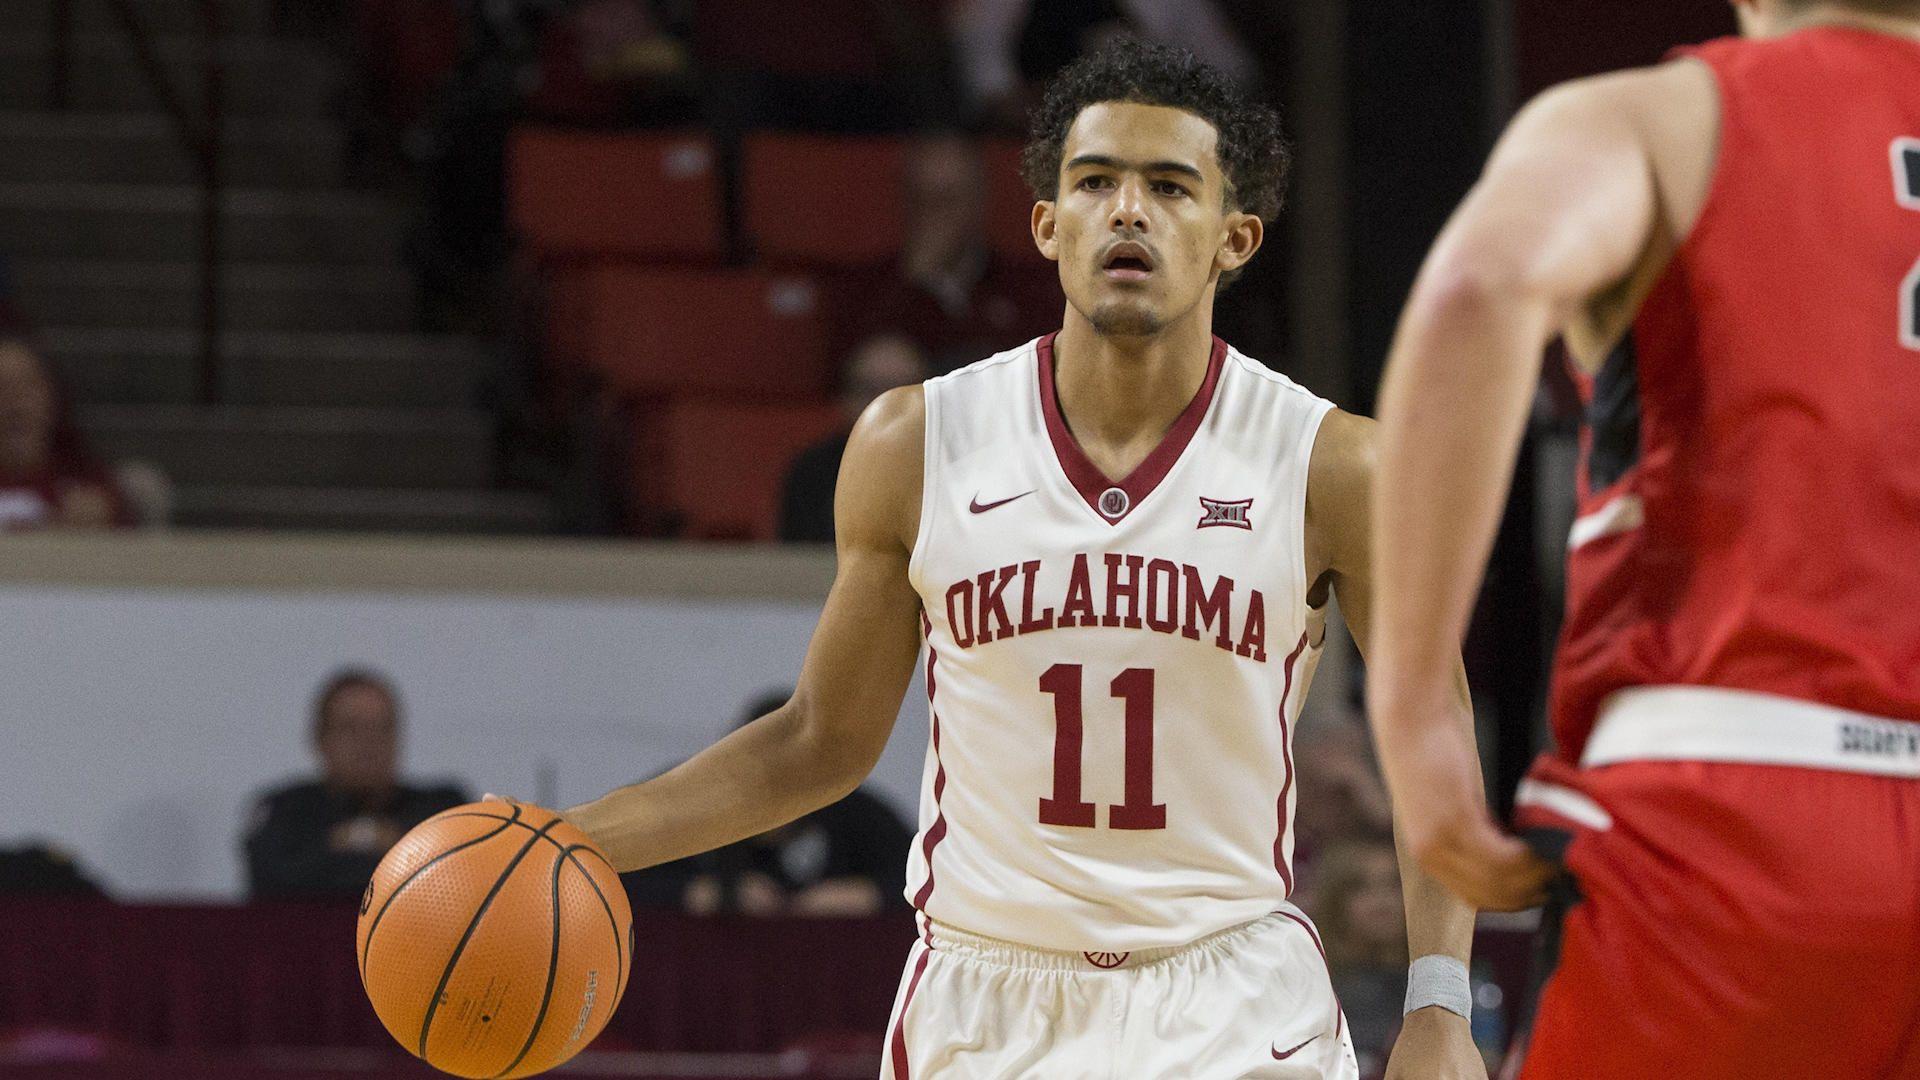 How good is Sooners' Trae Young?